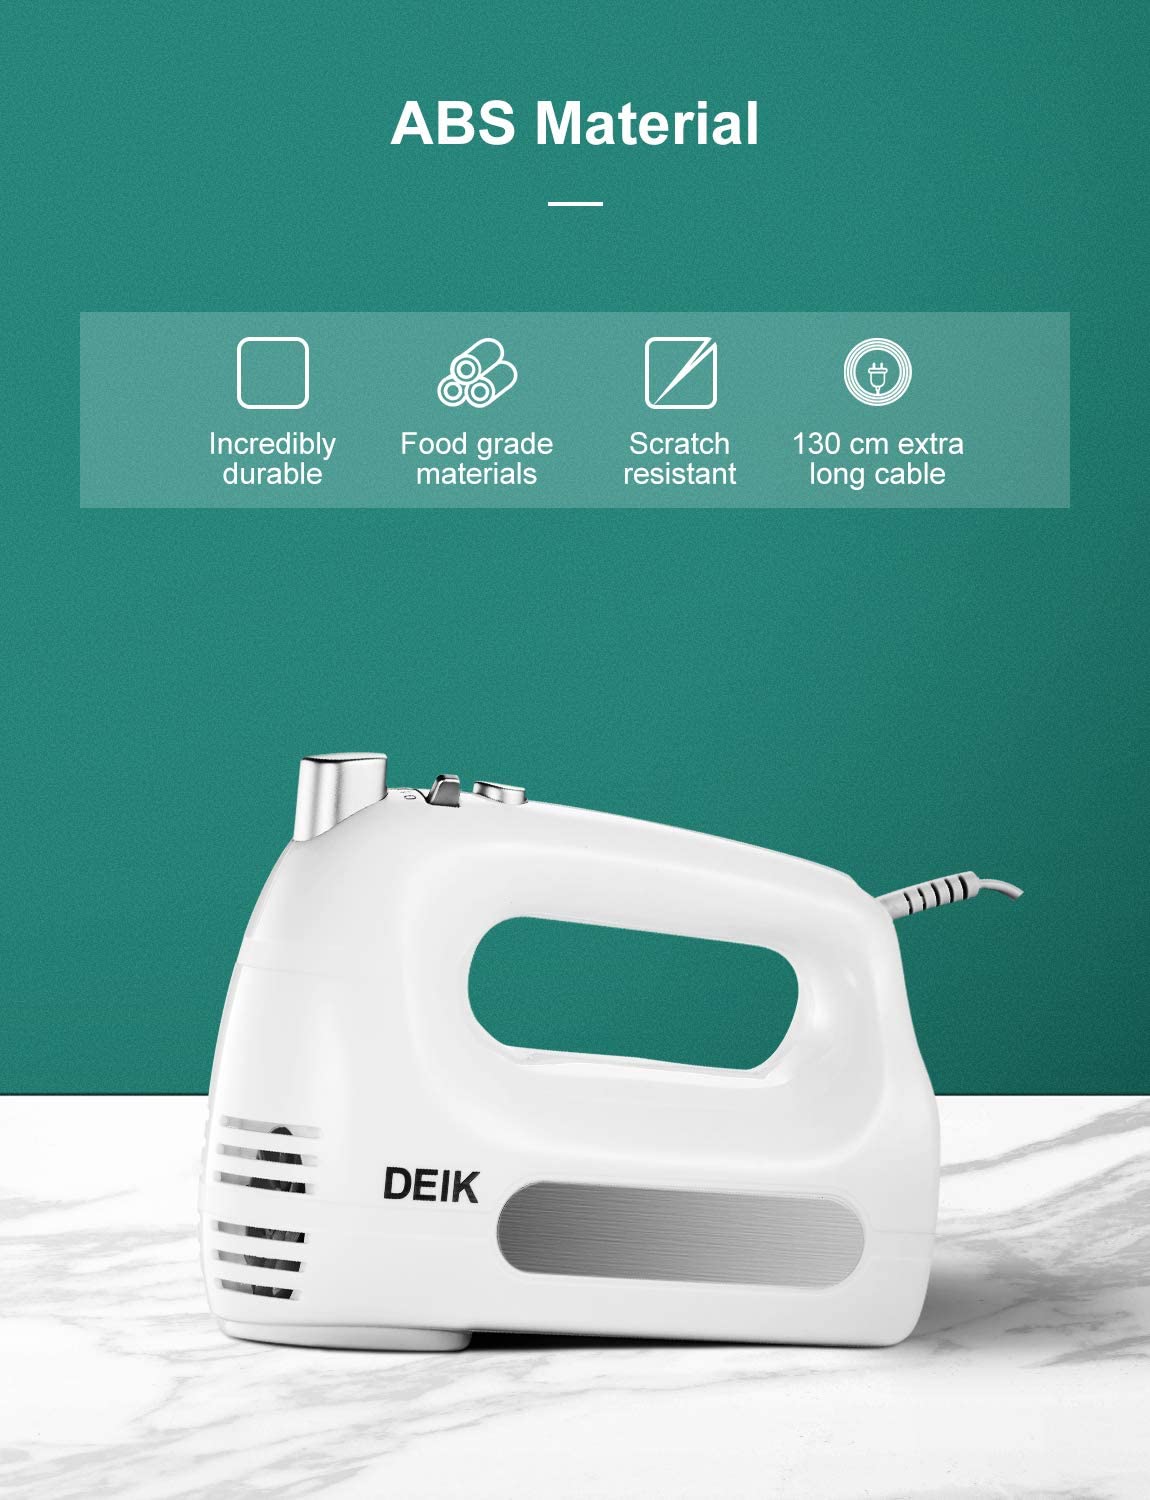 Deik Electric Hand Mixer,6-Speed 250W Hand Mixer Electric – Hand Held Mixer Includes 2 Stainless Steel Beaters and 2 Dough Hooks, Turbo Button, One Button Eject Design, ABS Material, White